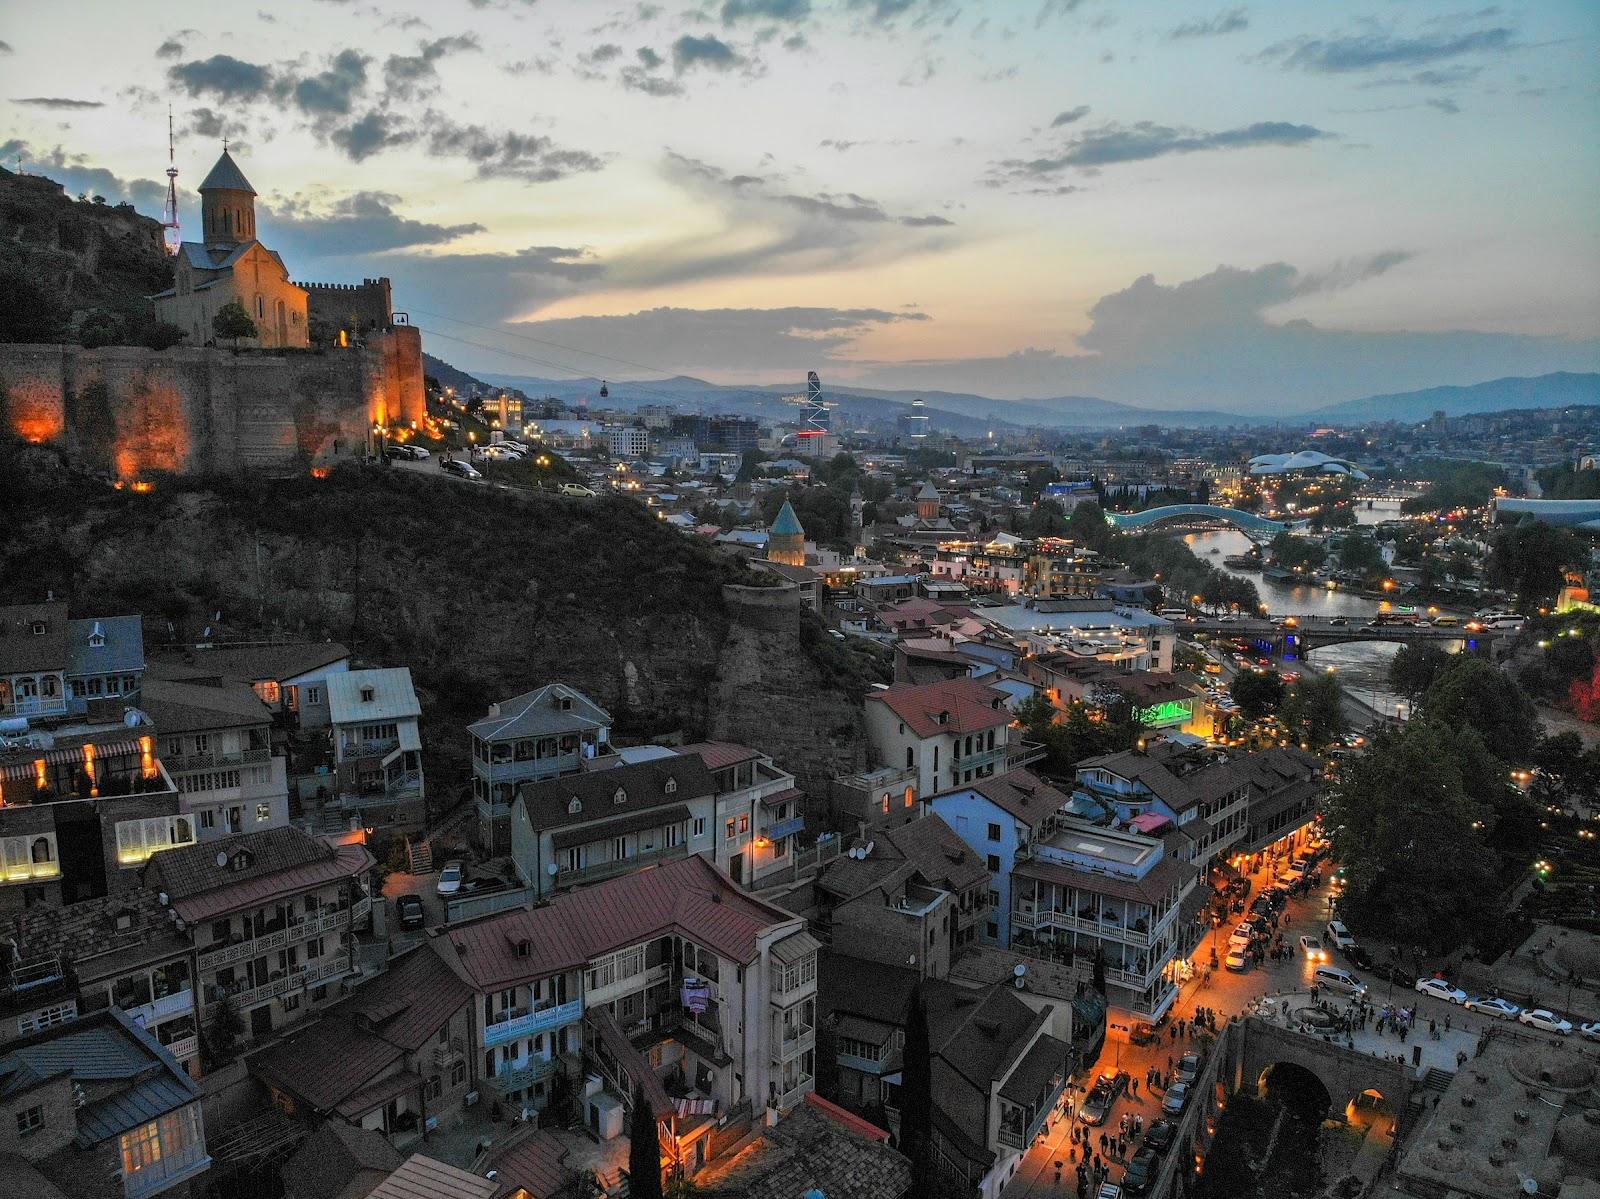 A view of Tbilisi at sunset, the capital city of Georgia